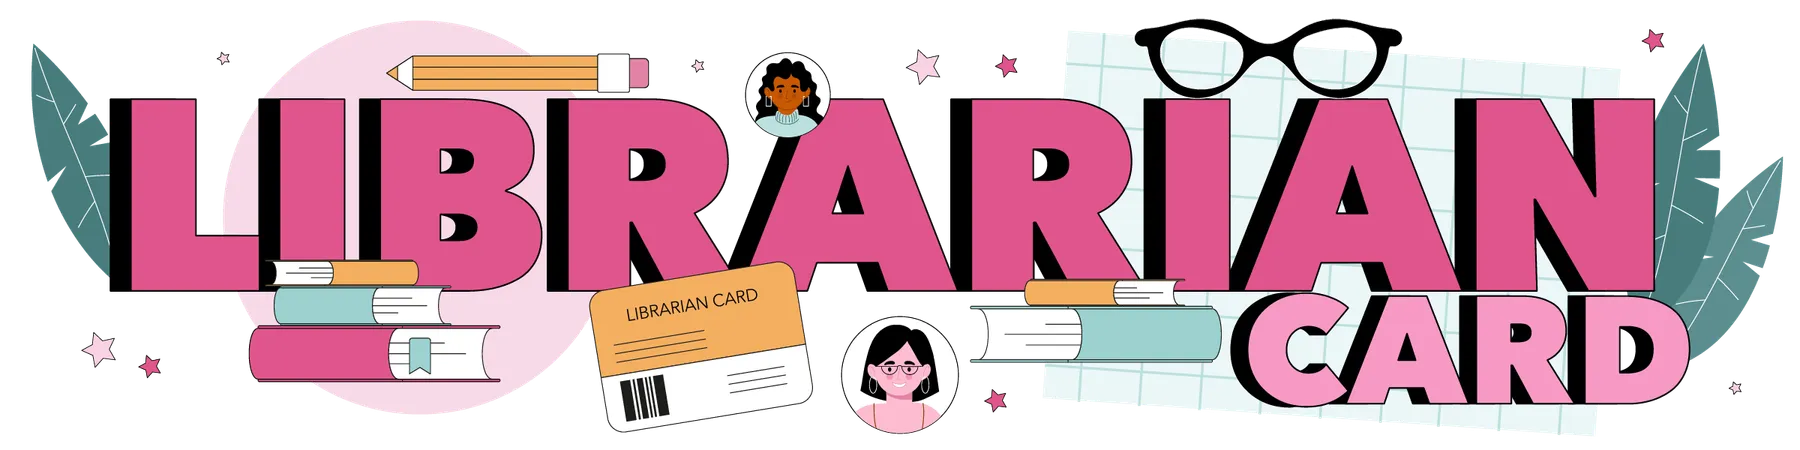 Librarian Card Typographic Header Library Staff Cataloging And Sorting Books In A Storage Filling Out Library Cards Online Order Catalogue Call Website Flat Vector Illustration Illustration